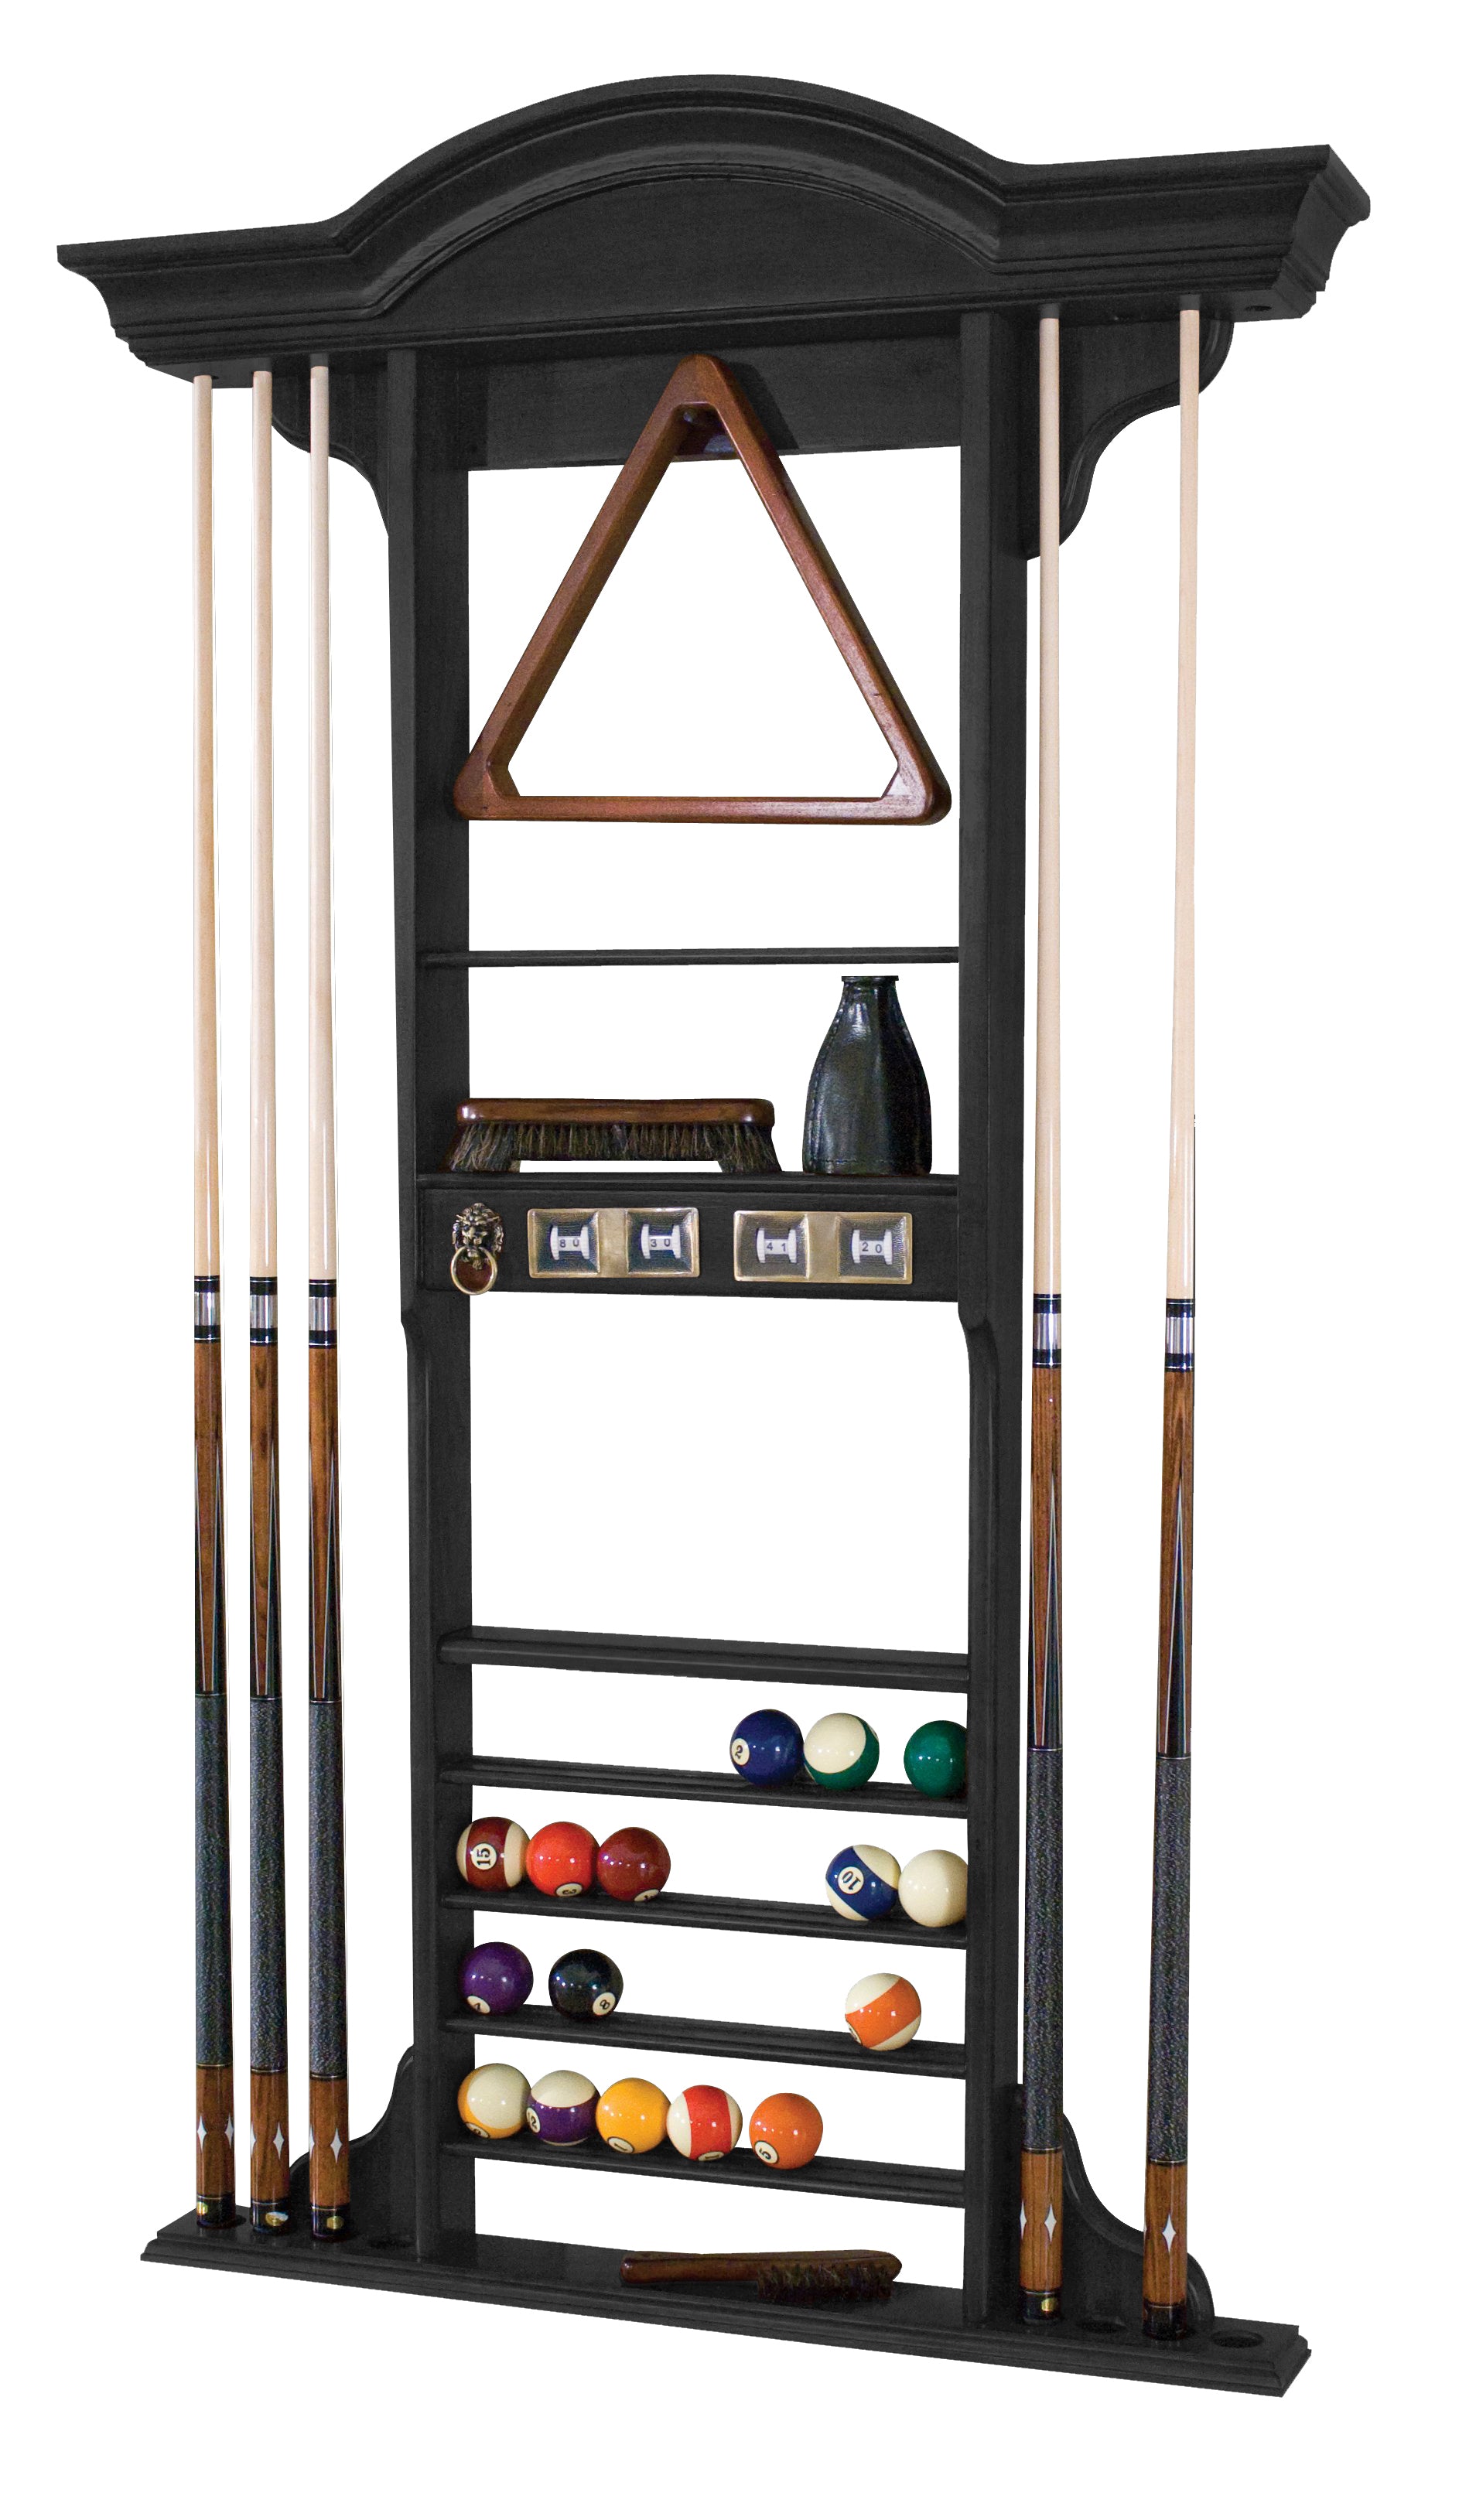 Legacy Billiards Classic Wall Cue Rack in Raven Finish